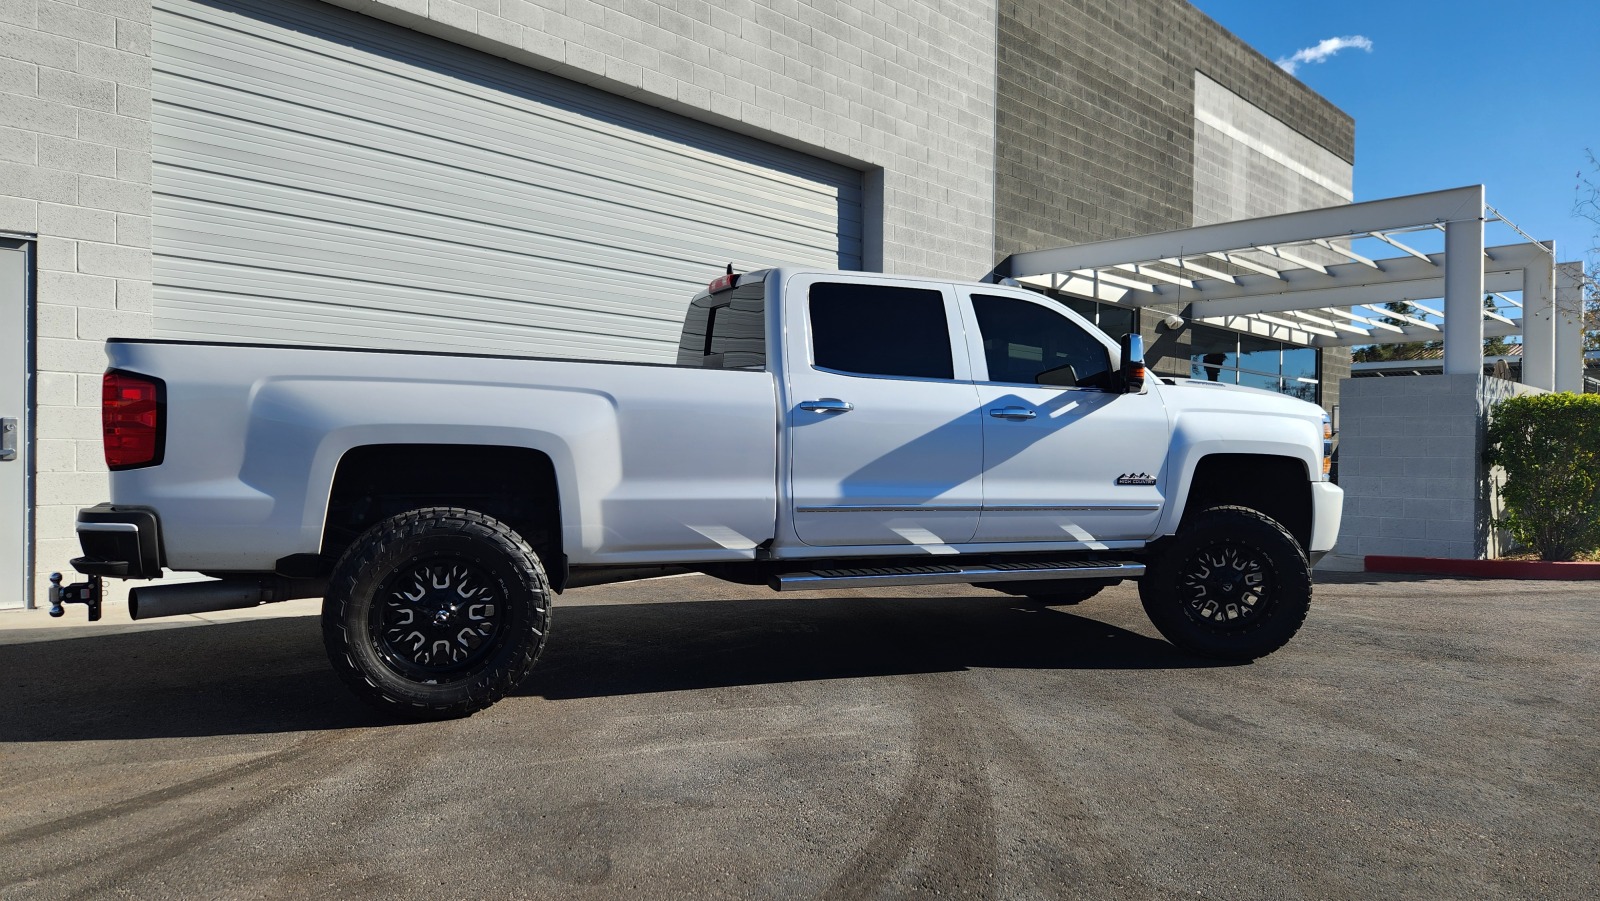 For Sale: 2019 Chevrolet 3500HD 4x4 High Country Crew Cab Long Bed Duramax - photo1